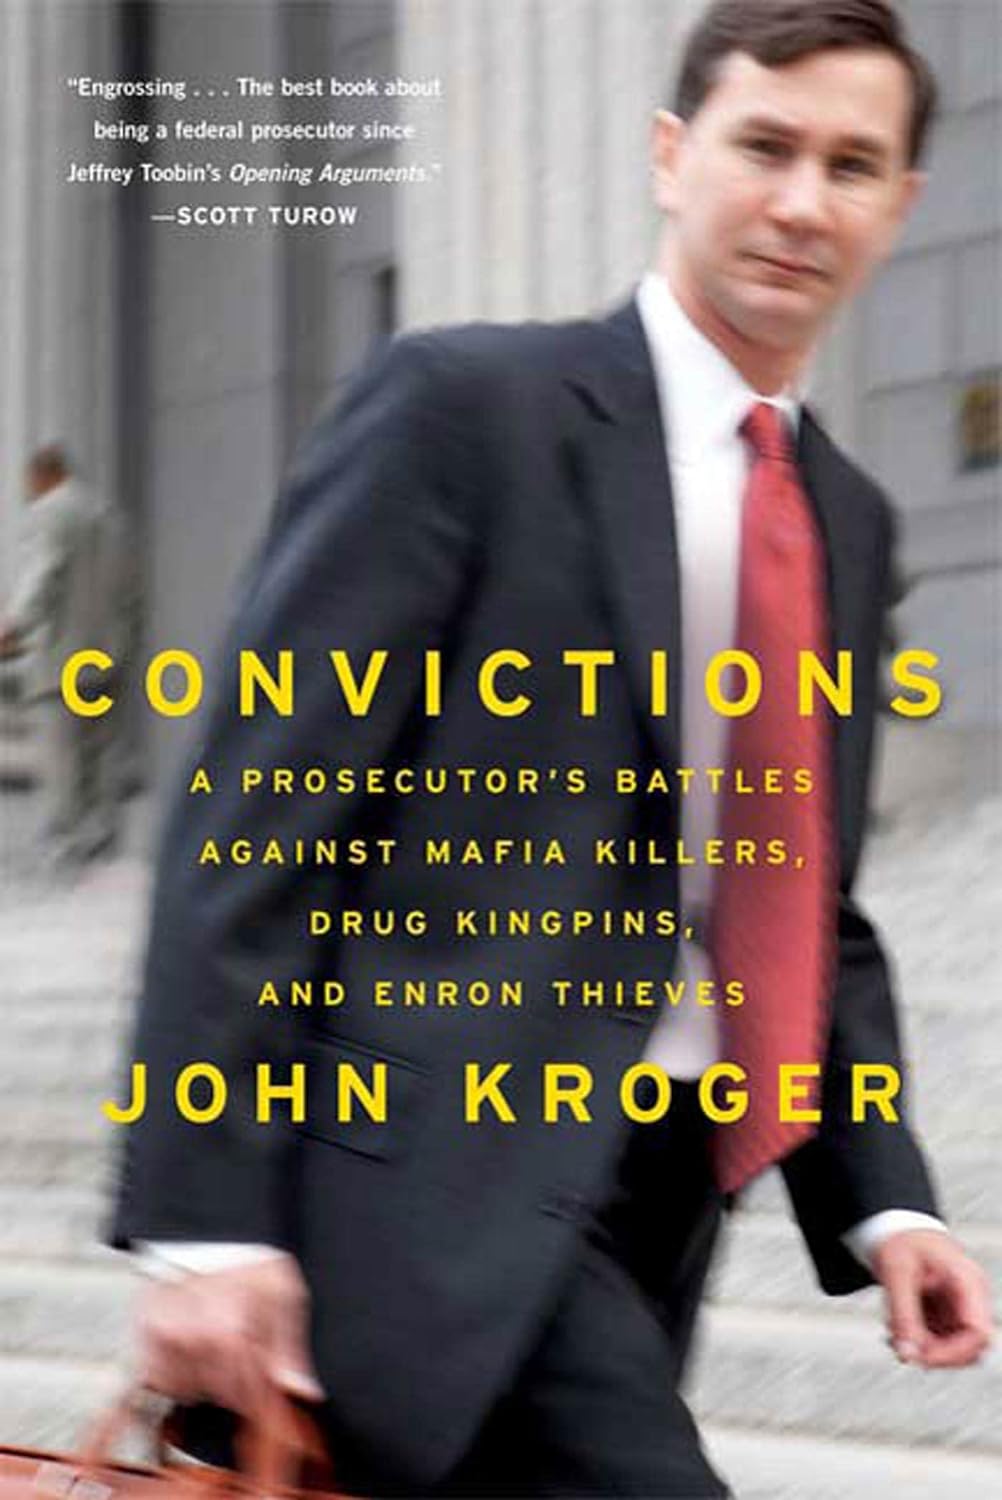 Convictions: A Prosecutor's Battles Against Mafia Killers, Drug Kingpins, and Enron Thieves book by John Kroger